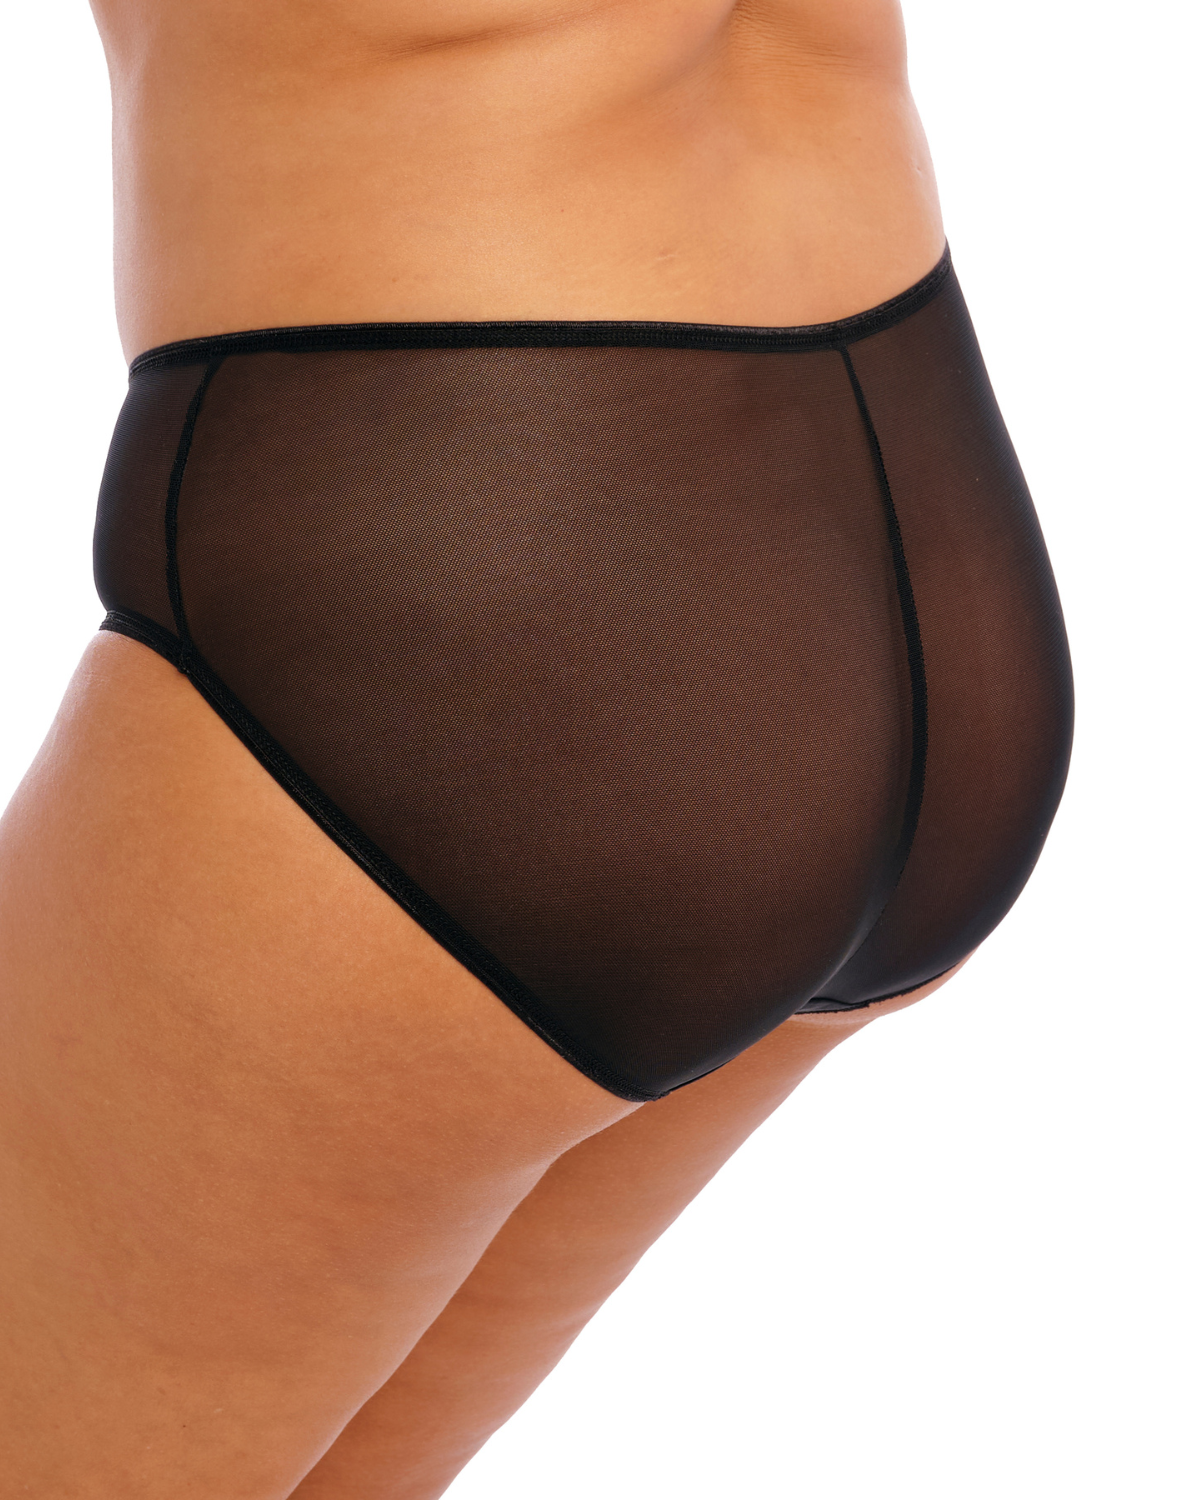 Model wearing a full brief panty with mesh inserts and beaded embroidery in black 